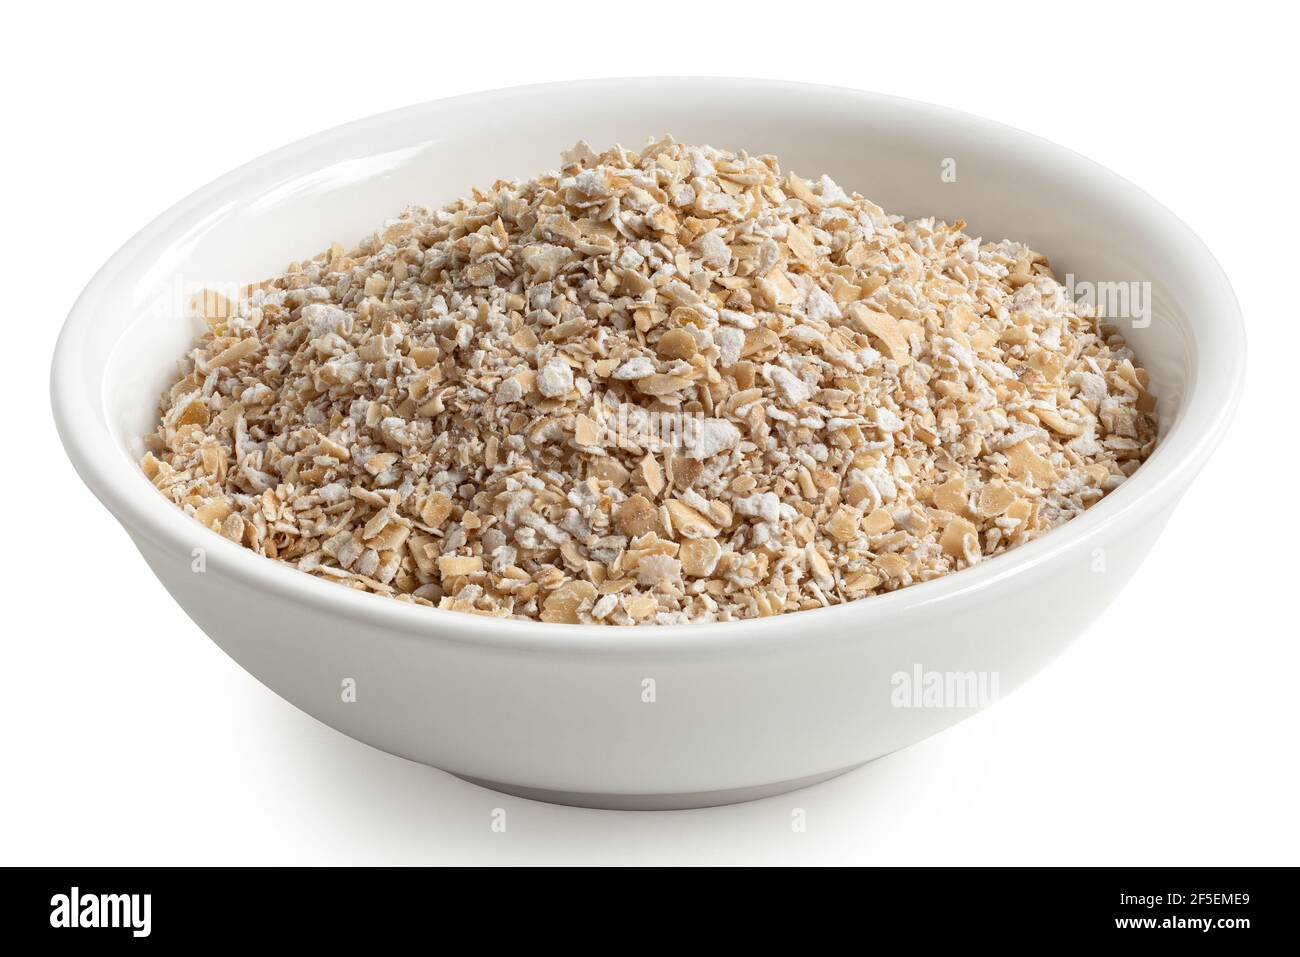 Uncooked coarse oatmeal in a white ceramic bowl isolated on white. Stock Photo